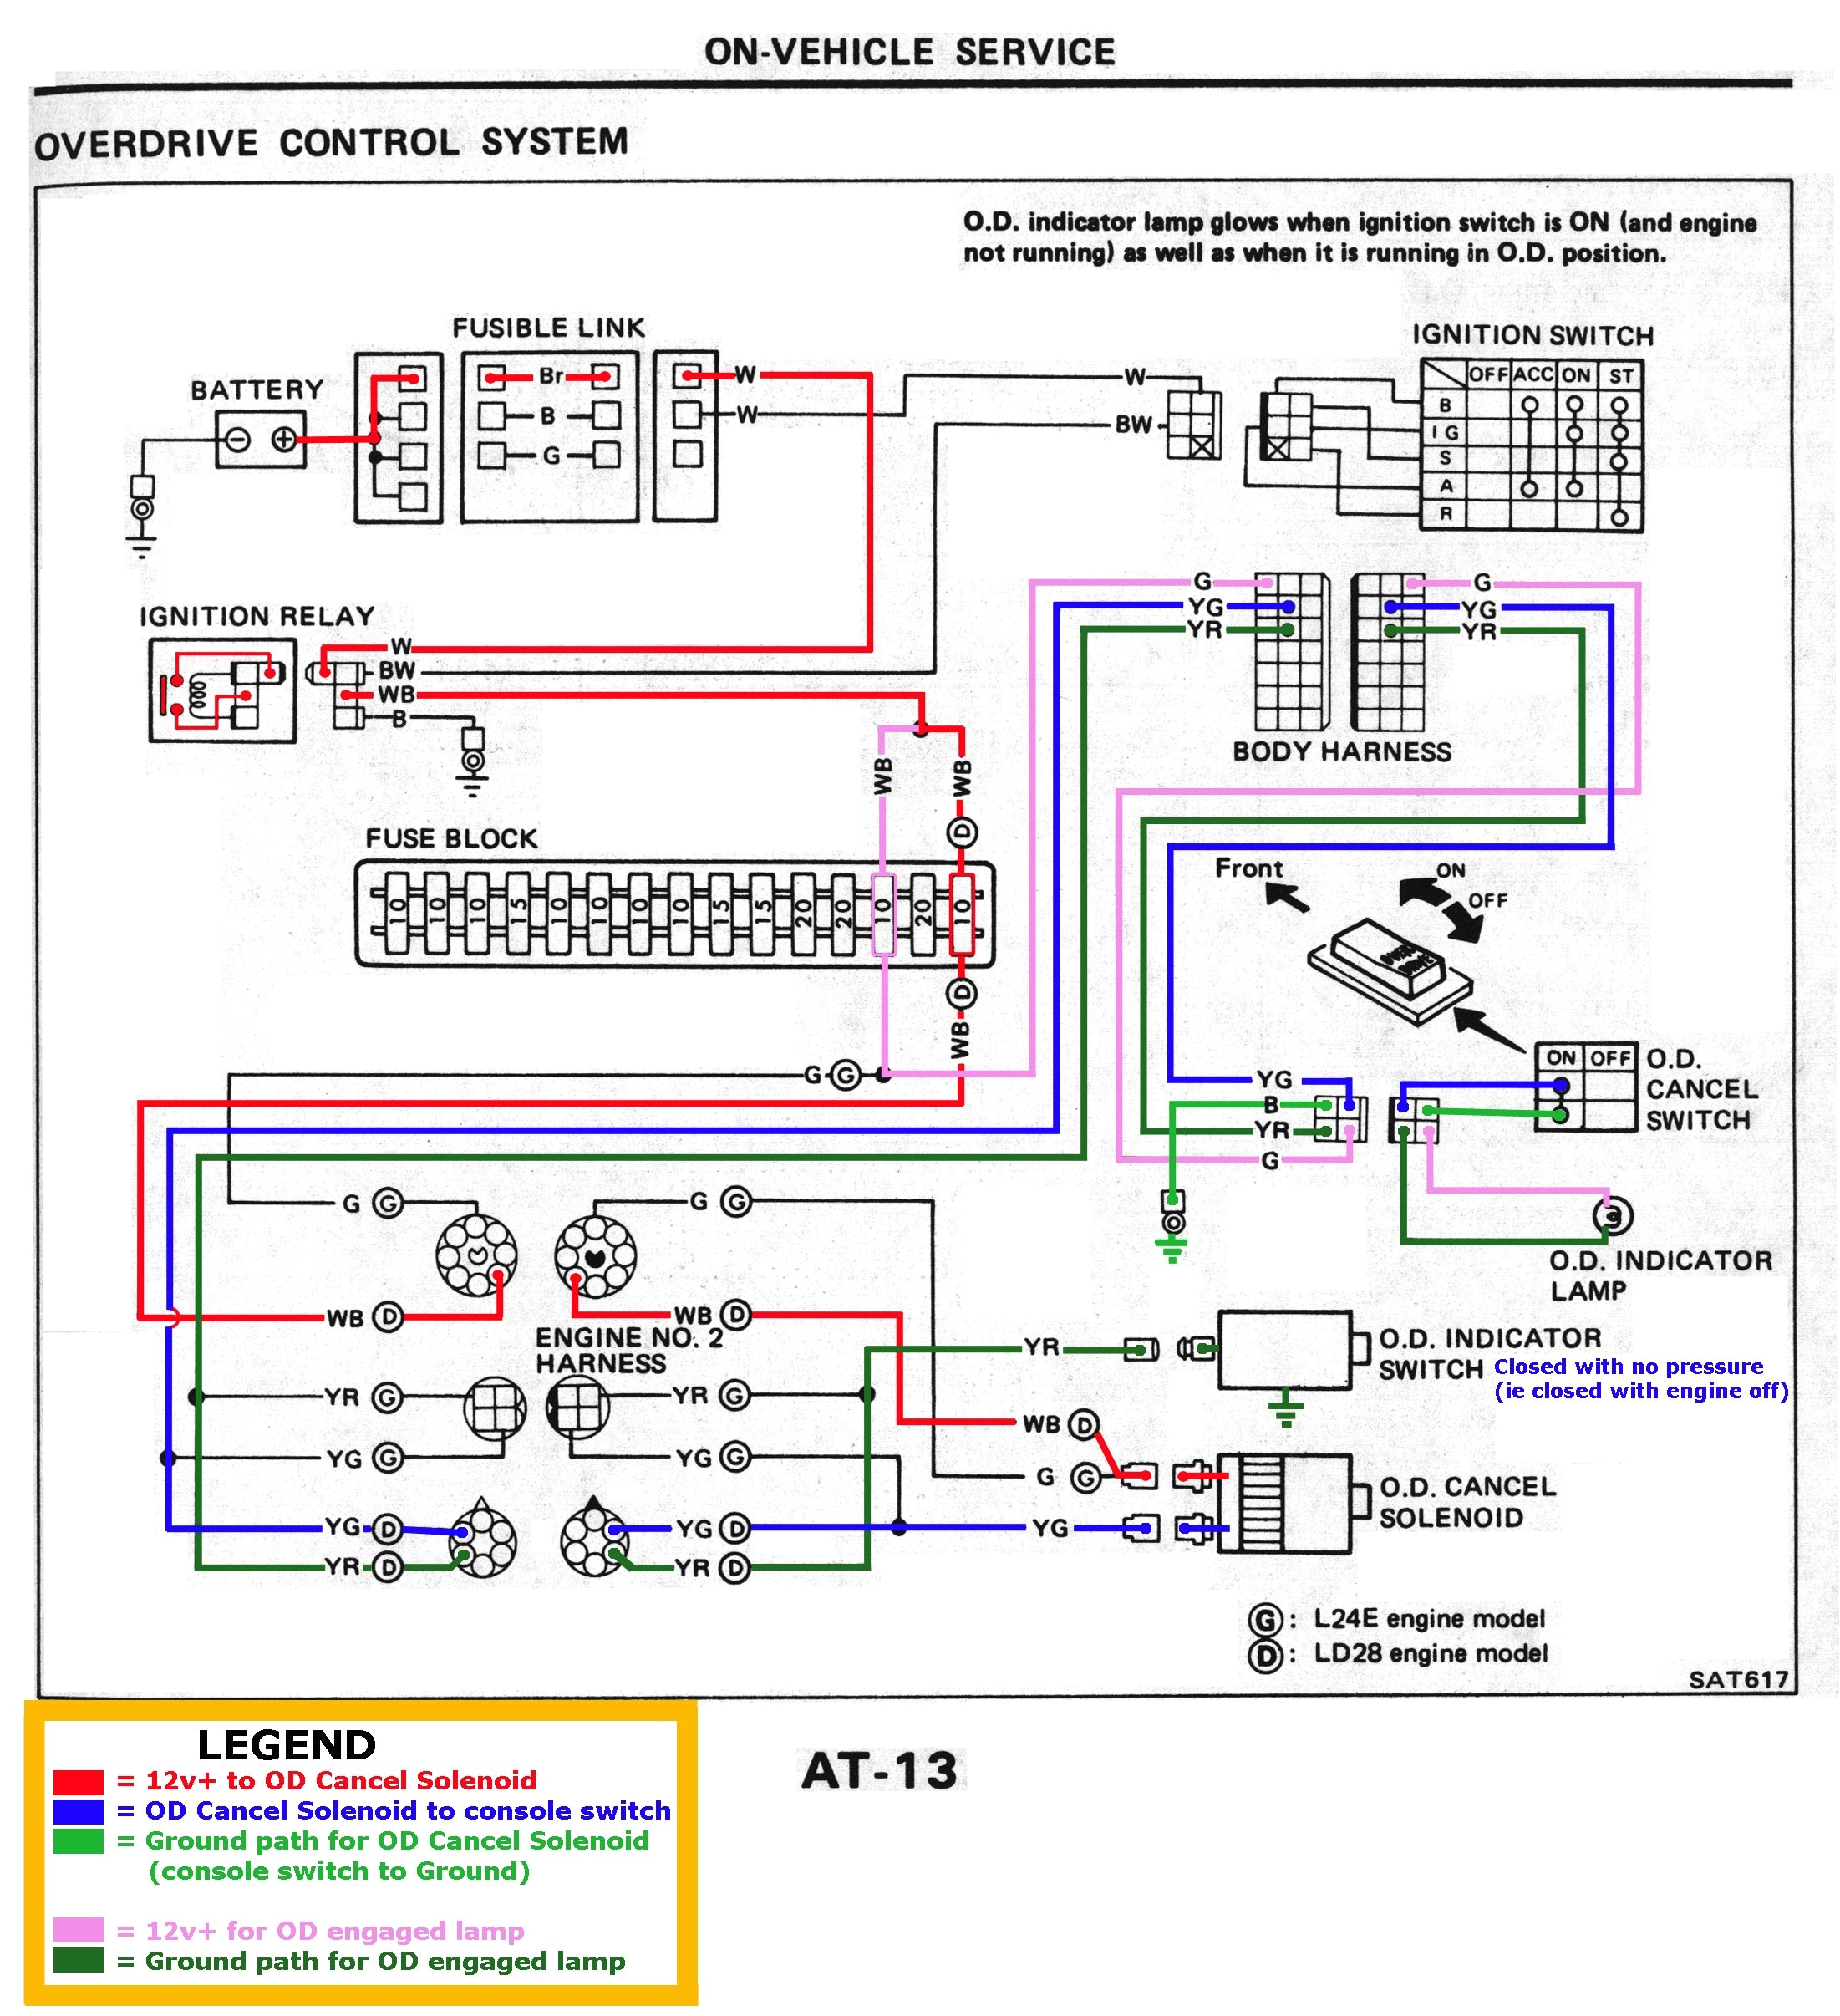 automatic transmission schematic diagram nissandiesel forums view topic l4n71b od at 1983 84